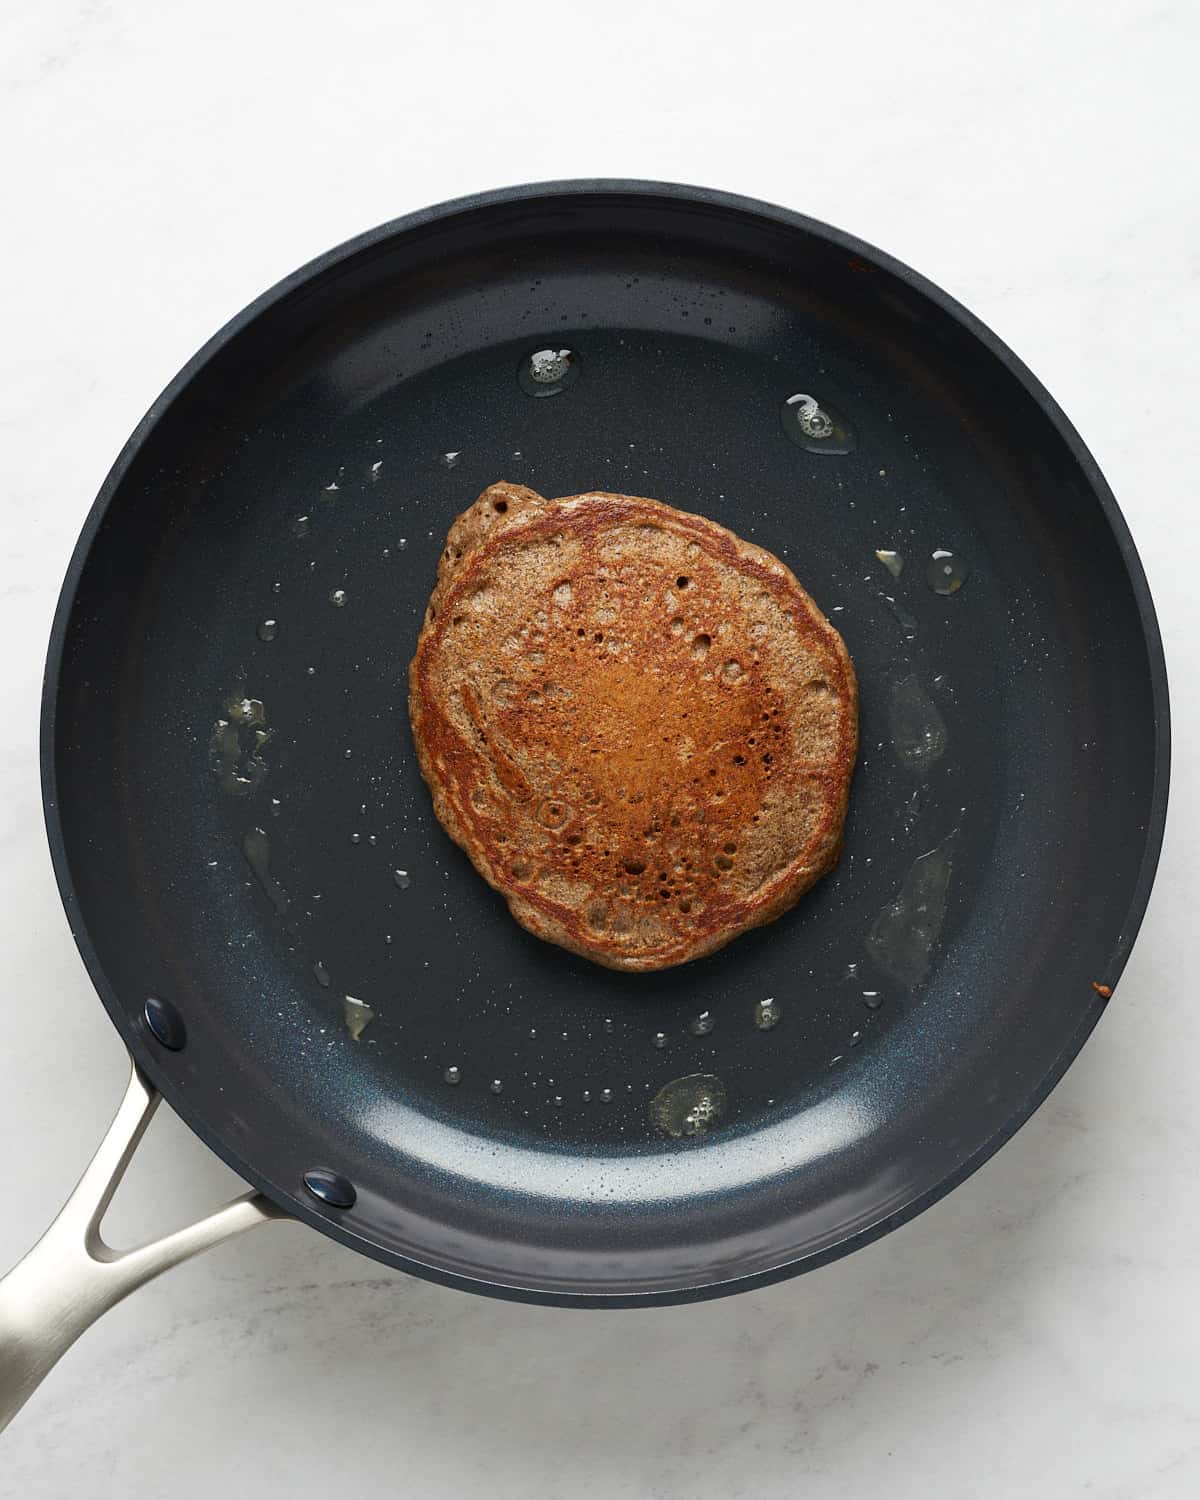 Top view of pancake on a non-stick skillet with melted vegan butter.